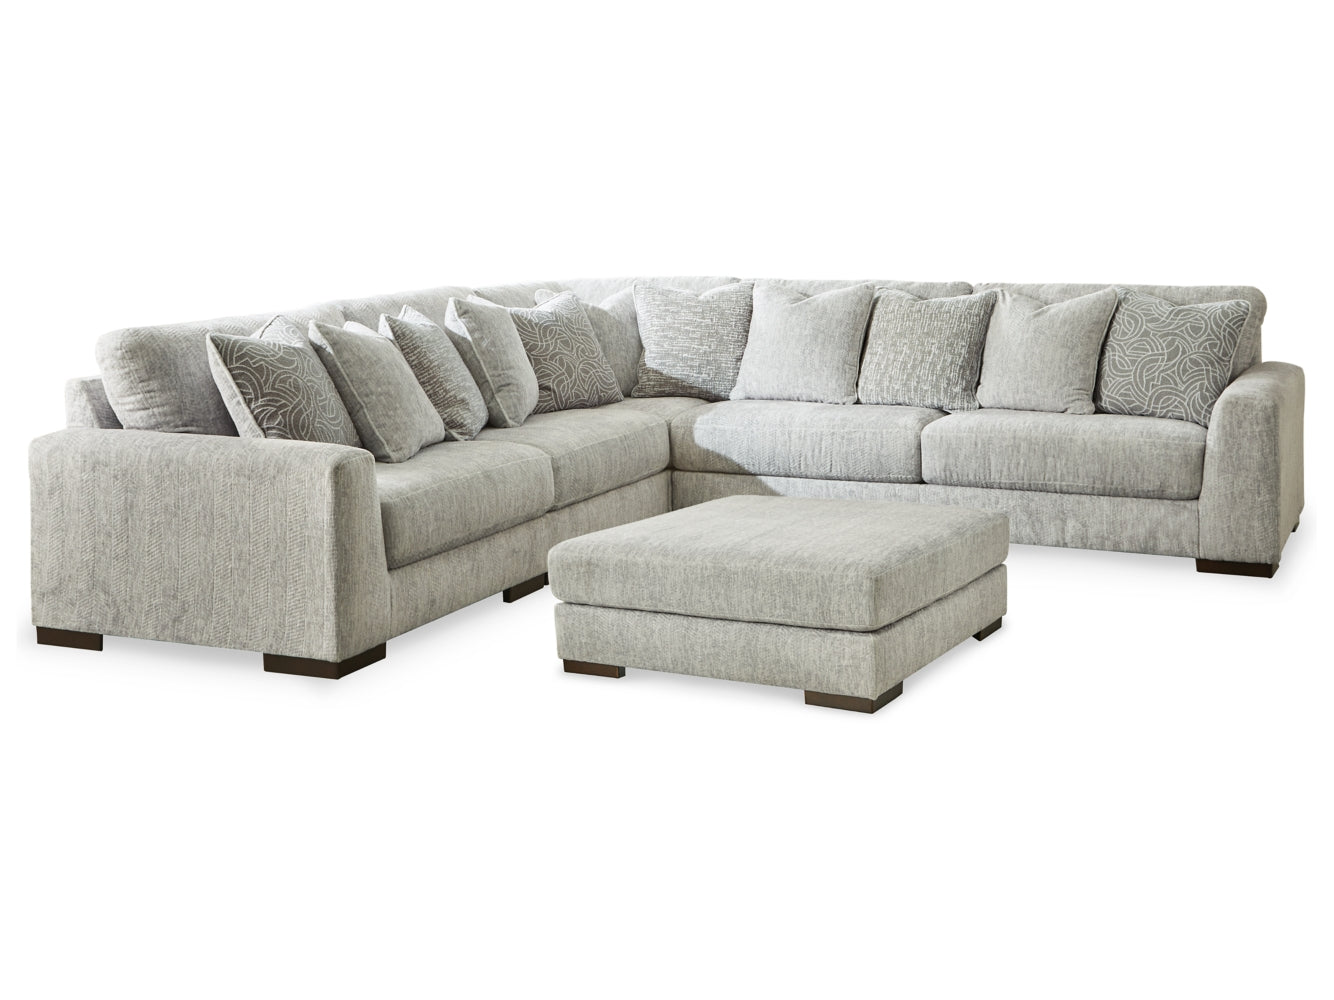 Regent Park 5-Piece Sectional with Ottoman - furniture place usa